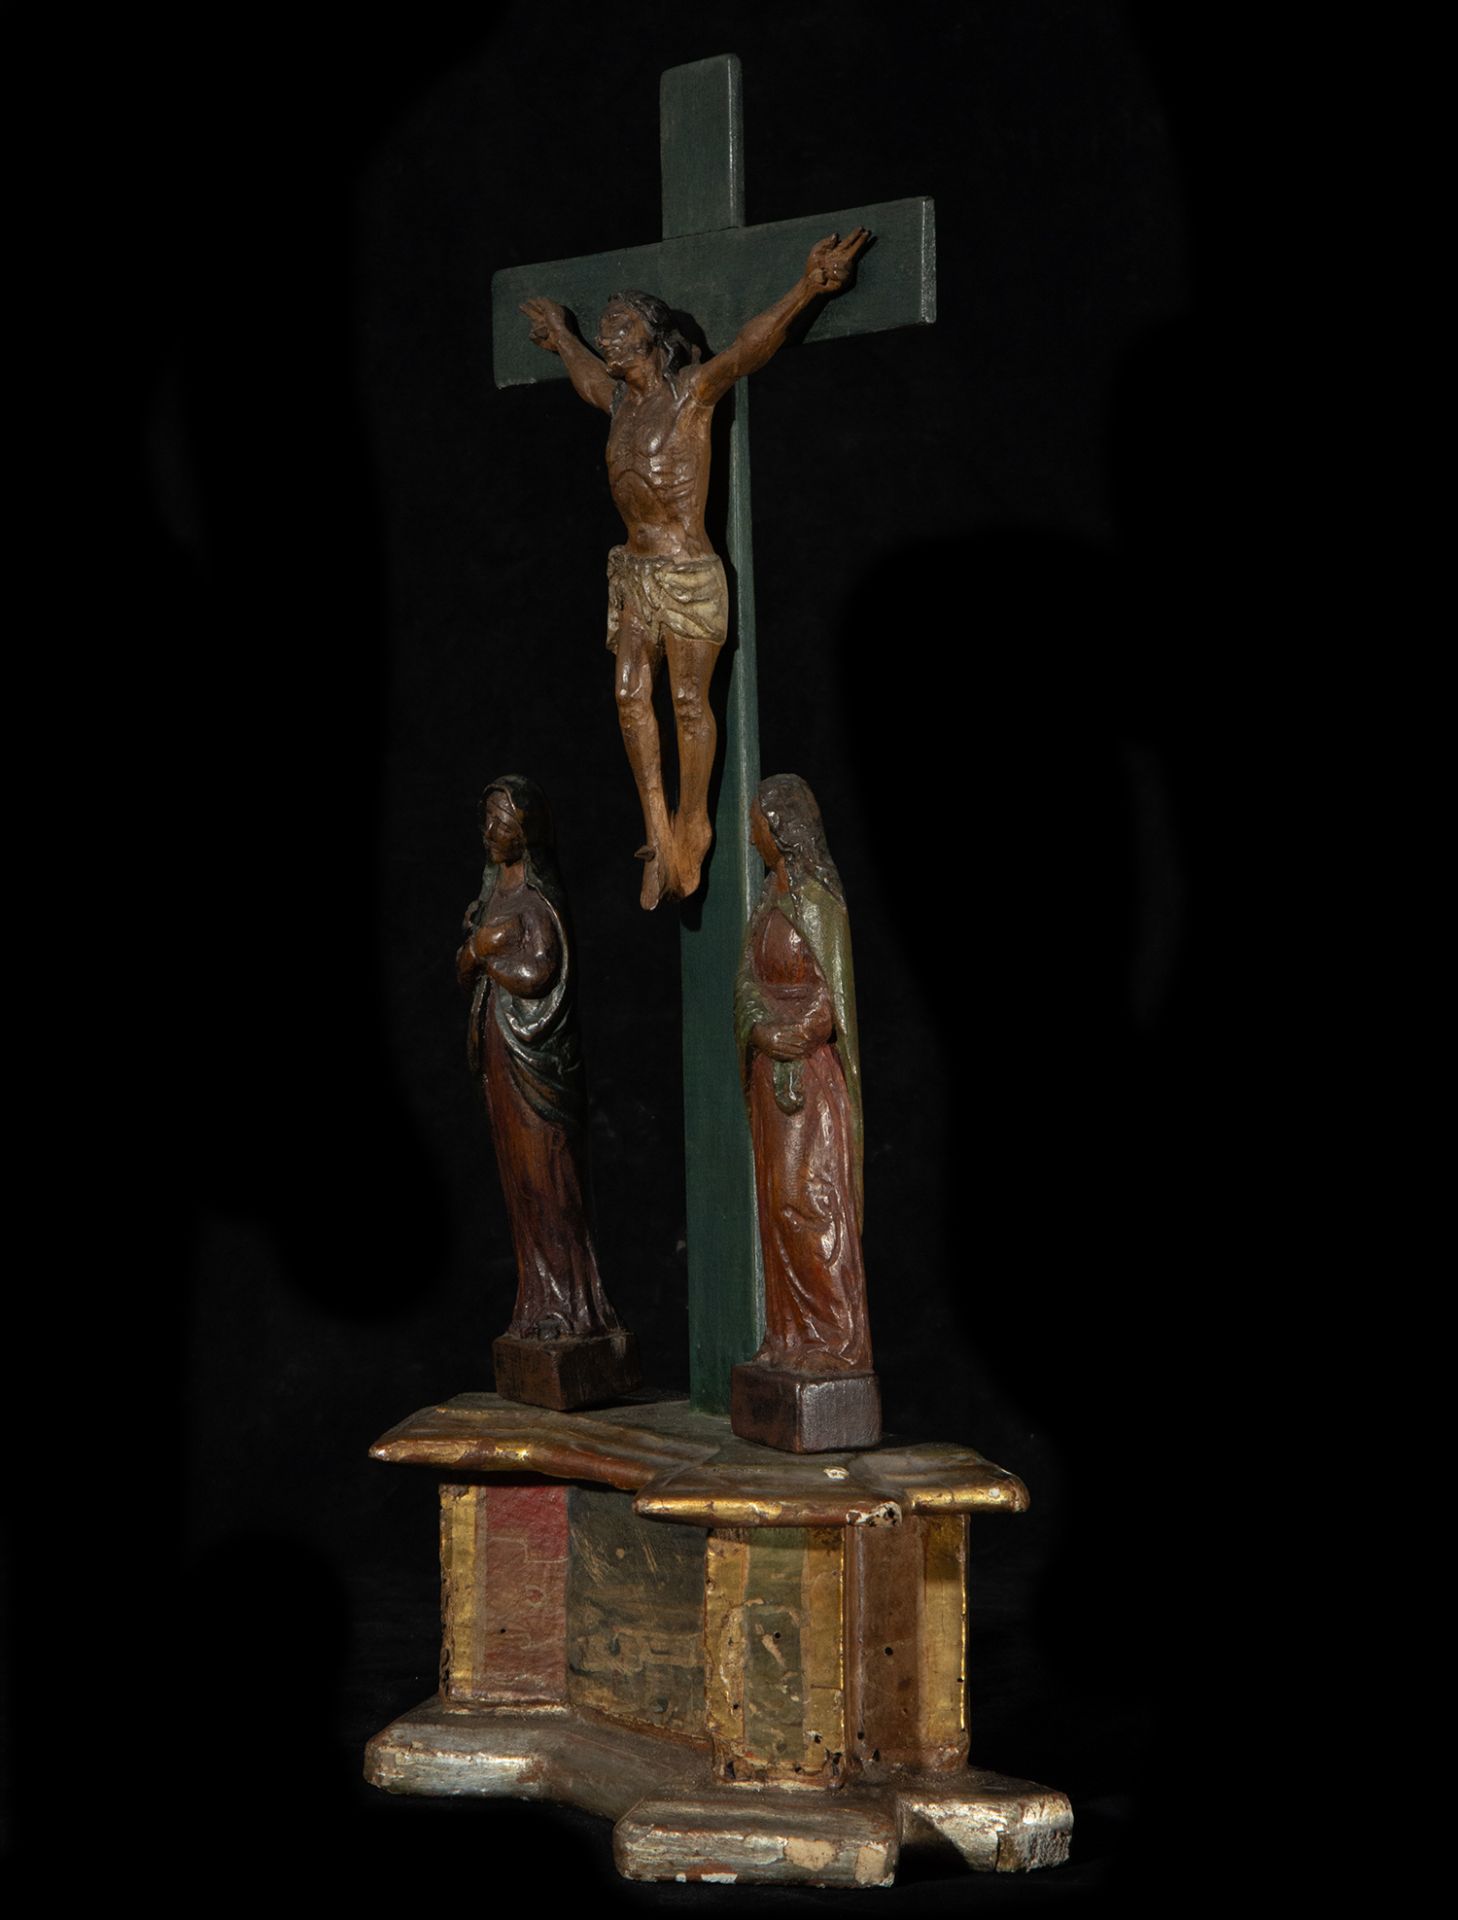 Portuguese colonial tabletop Calvary from the 16th - 17th centuries, Goa, in Teak wood - Image 4 of 6